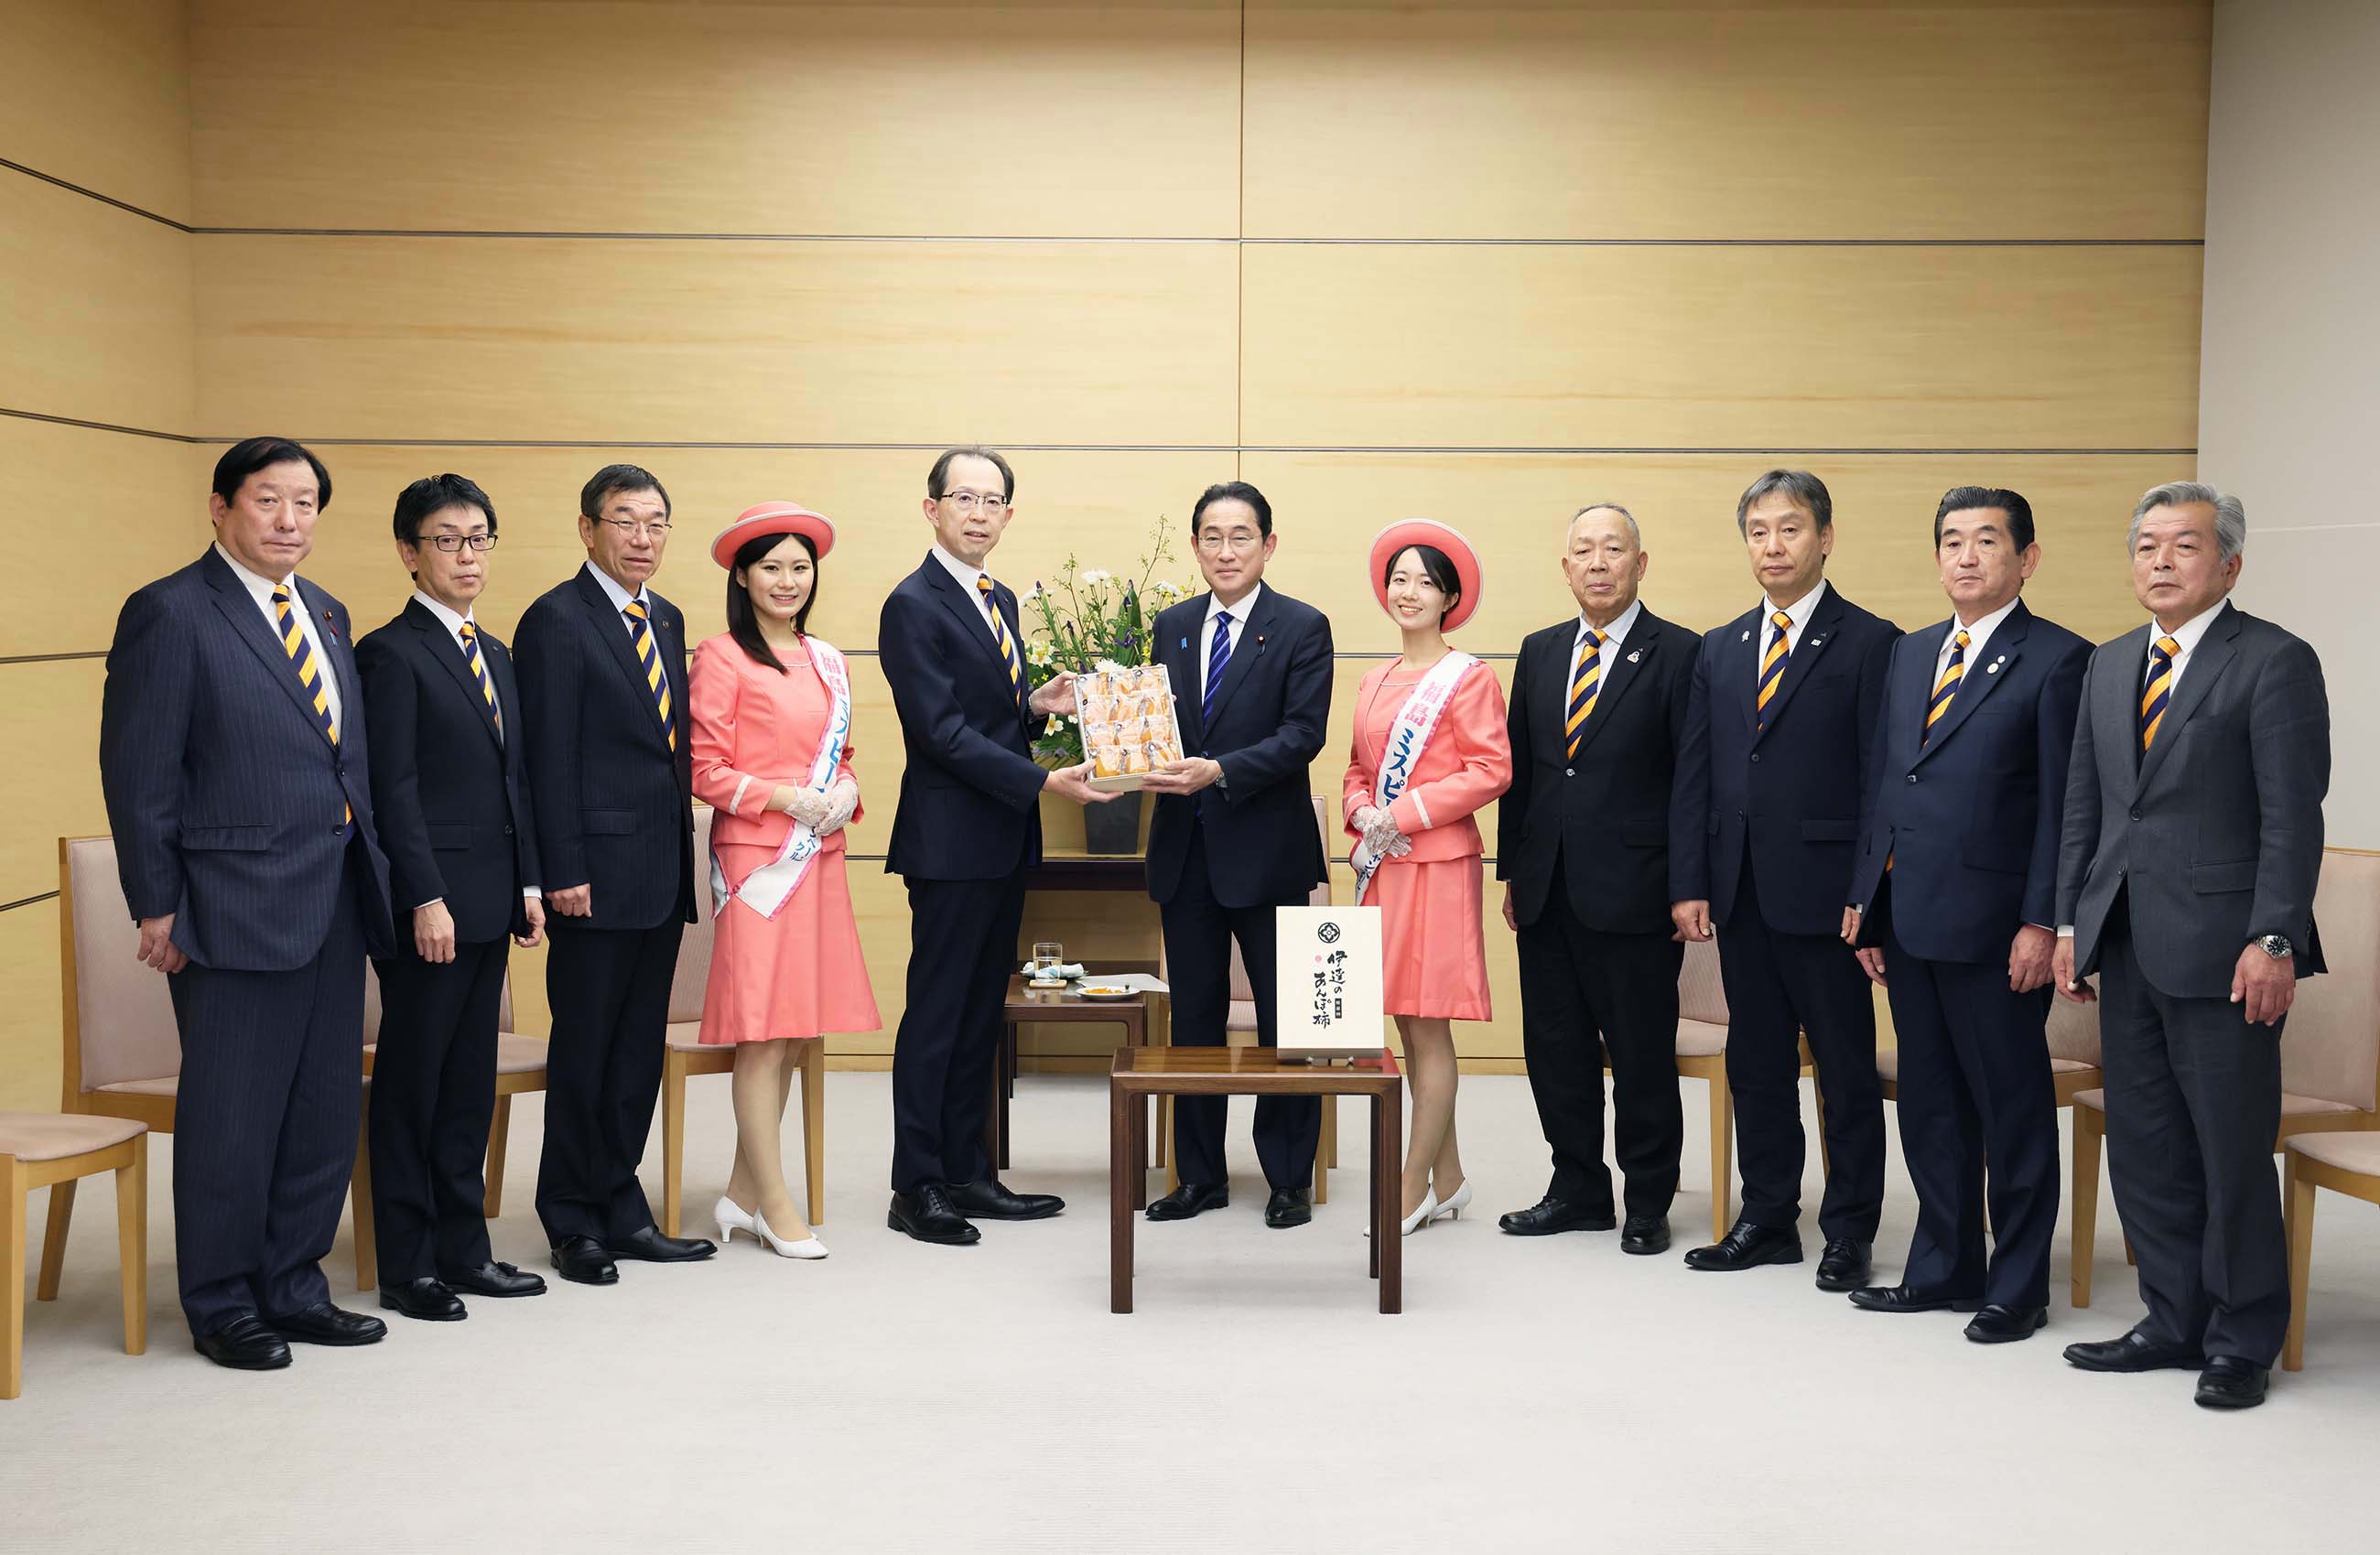 Presentation of Anpogaki Persimmons by Governor of Fukushima Prefecture and Others